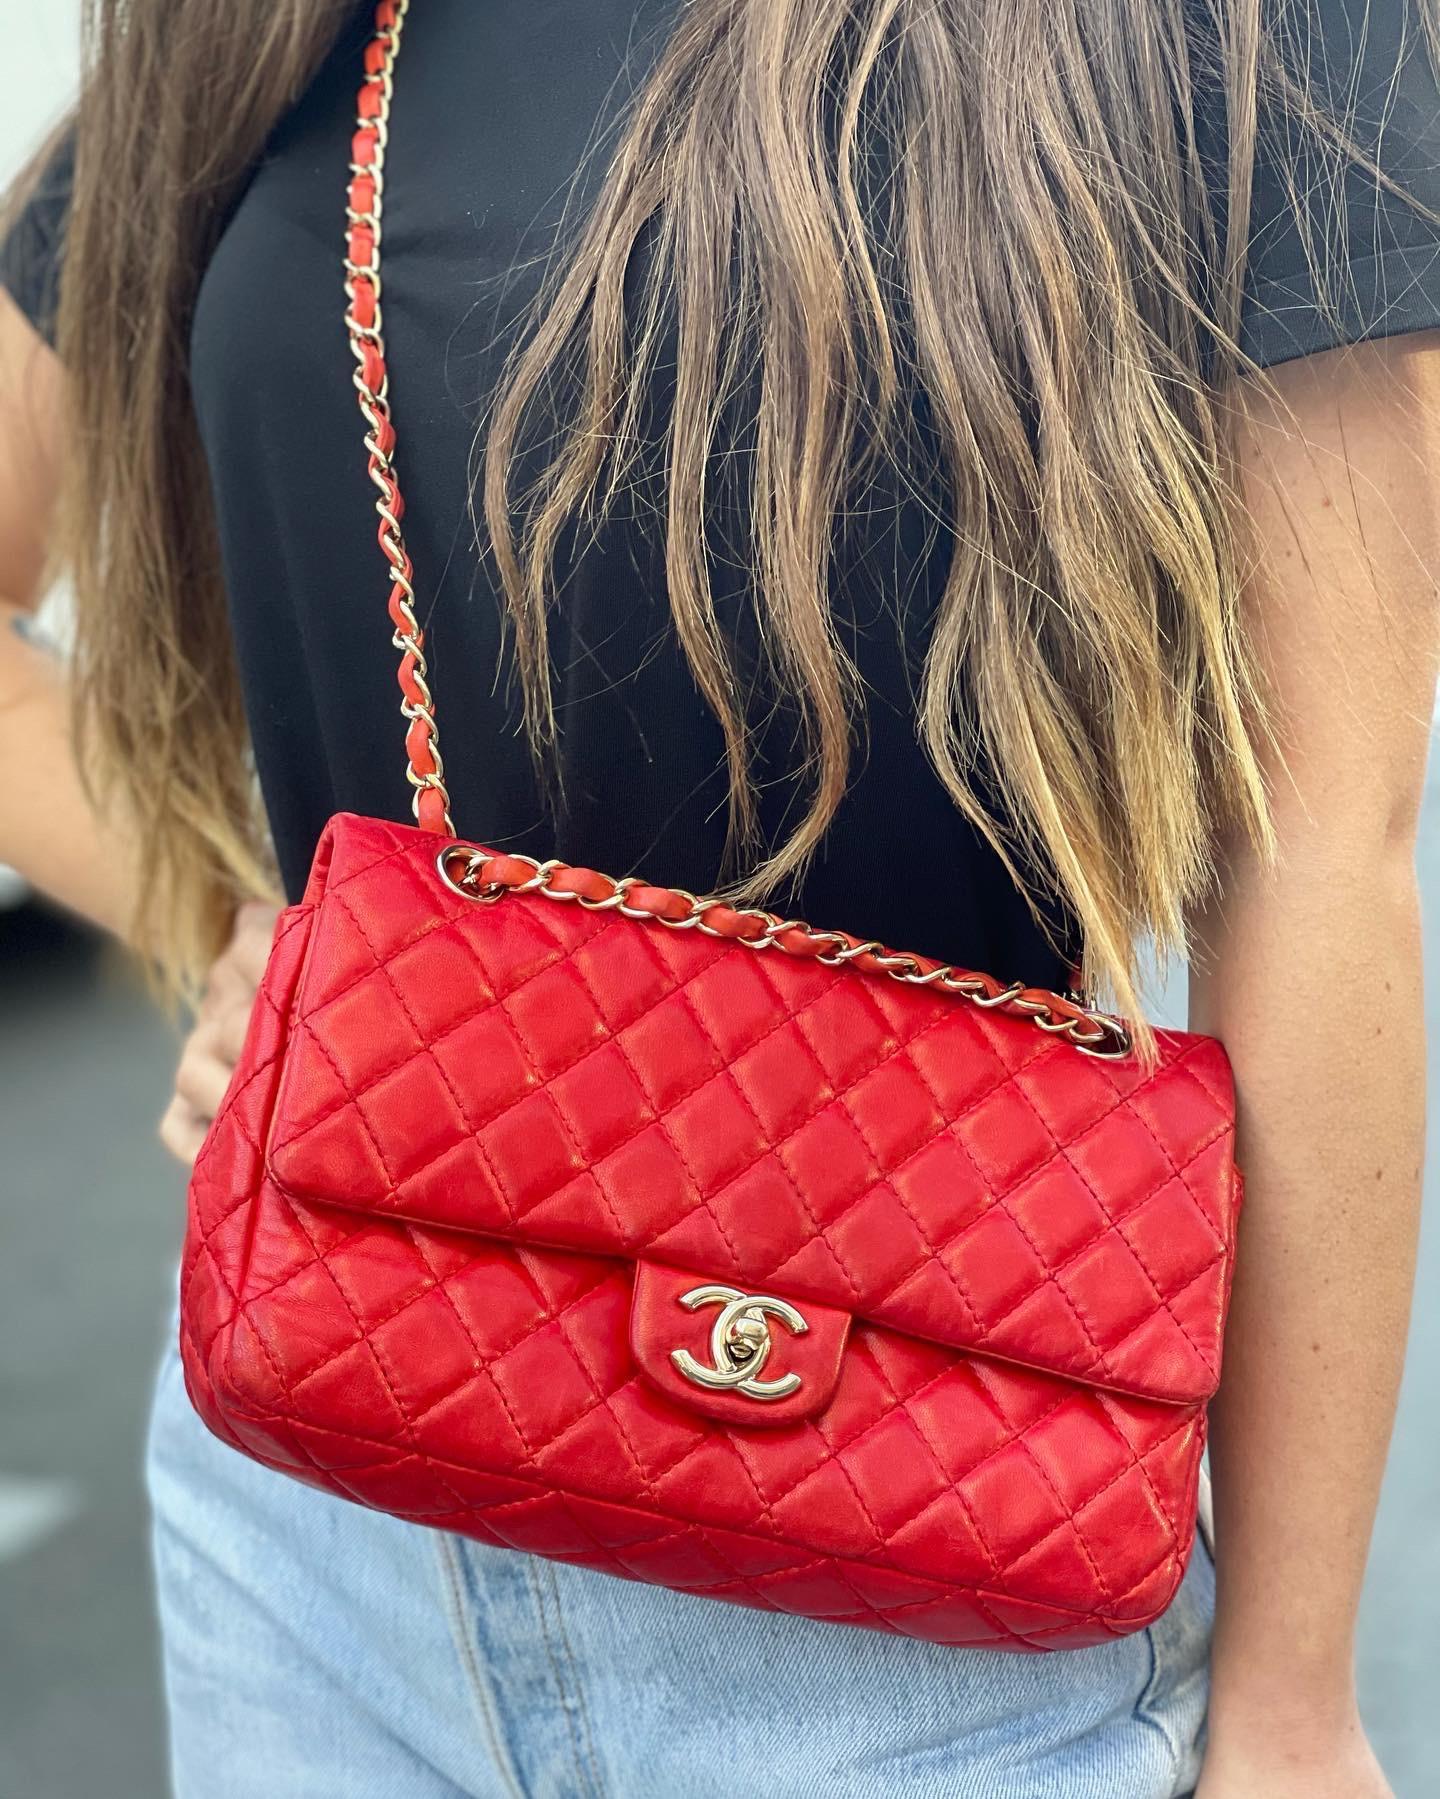 Chanel model 2.55 double-flap bag made of red quilted leather with golden hardware.
Closure with classic CC logo, internally quite large.
Equipped with leather shoulder strap and sliding chain.
The bag is slightly darkened, but overall in good